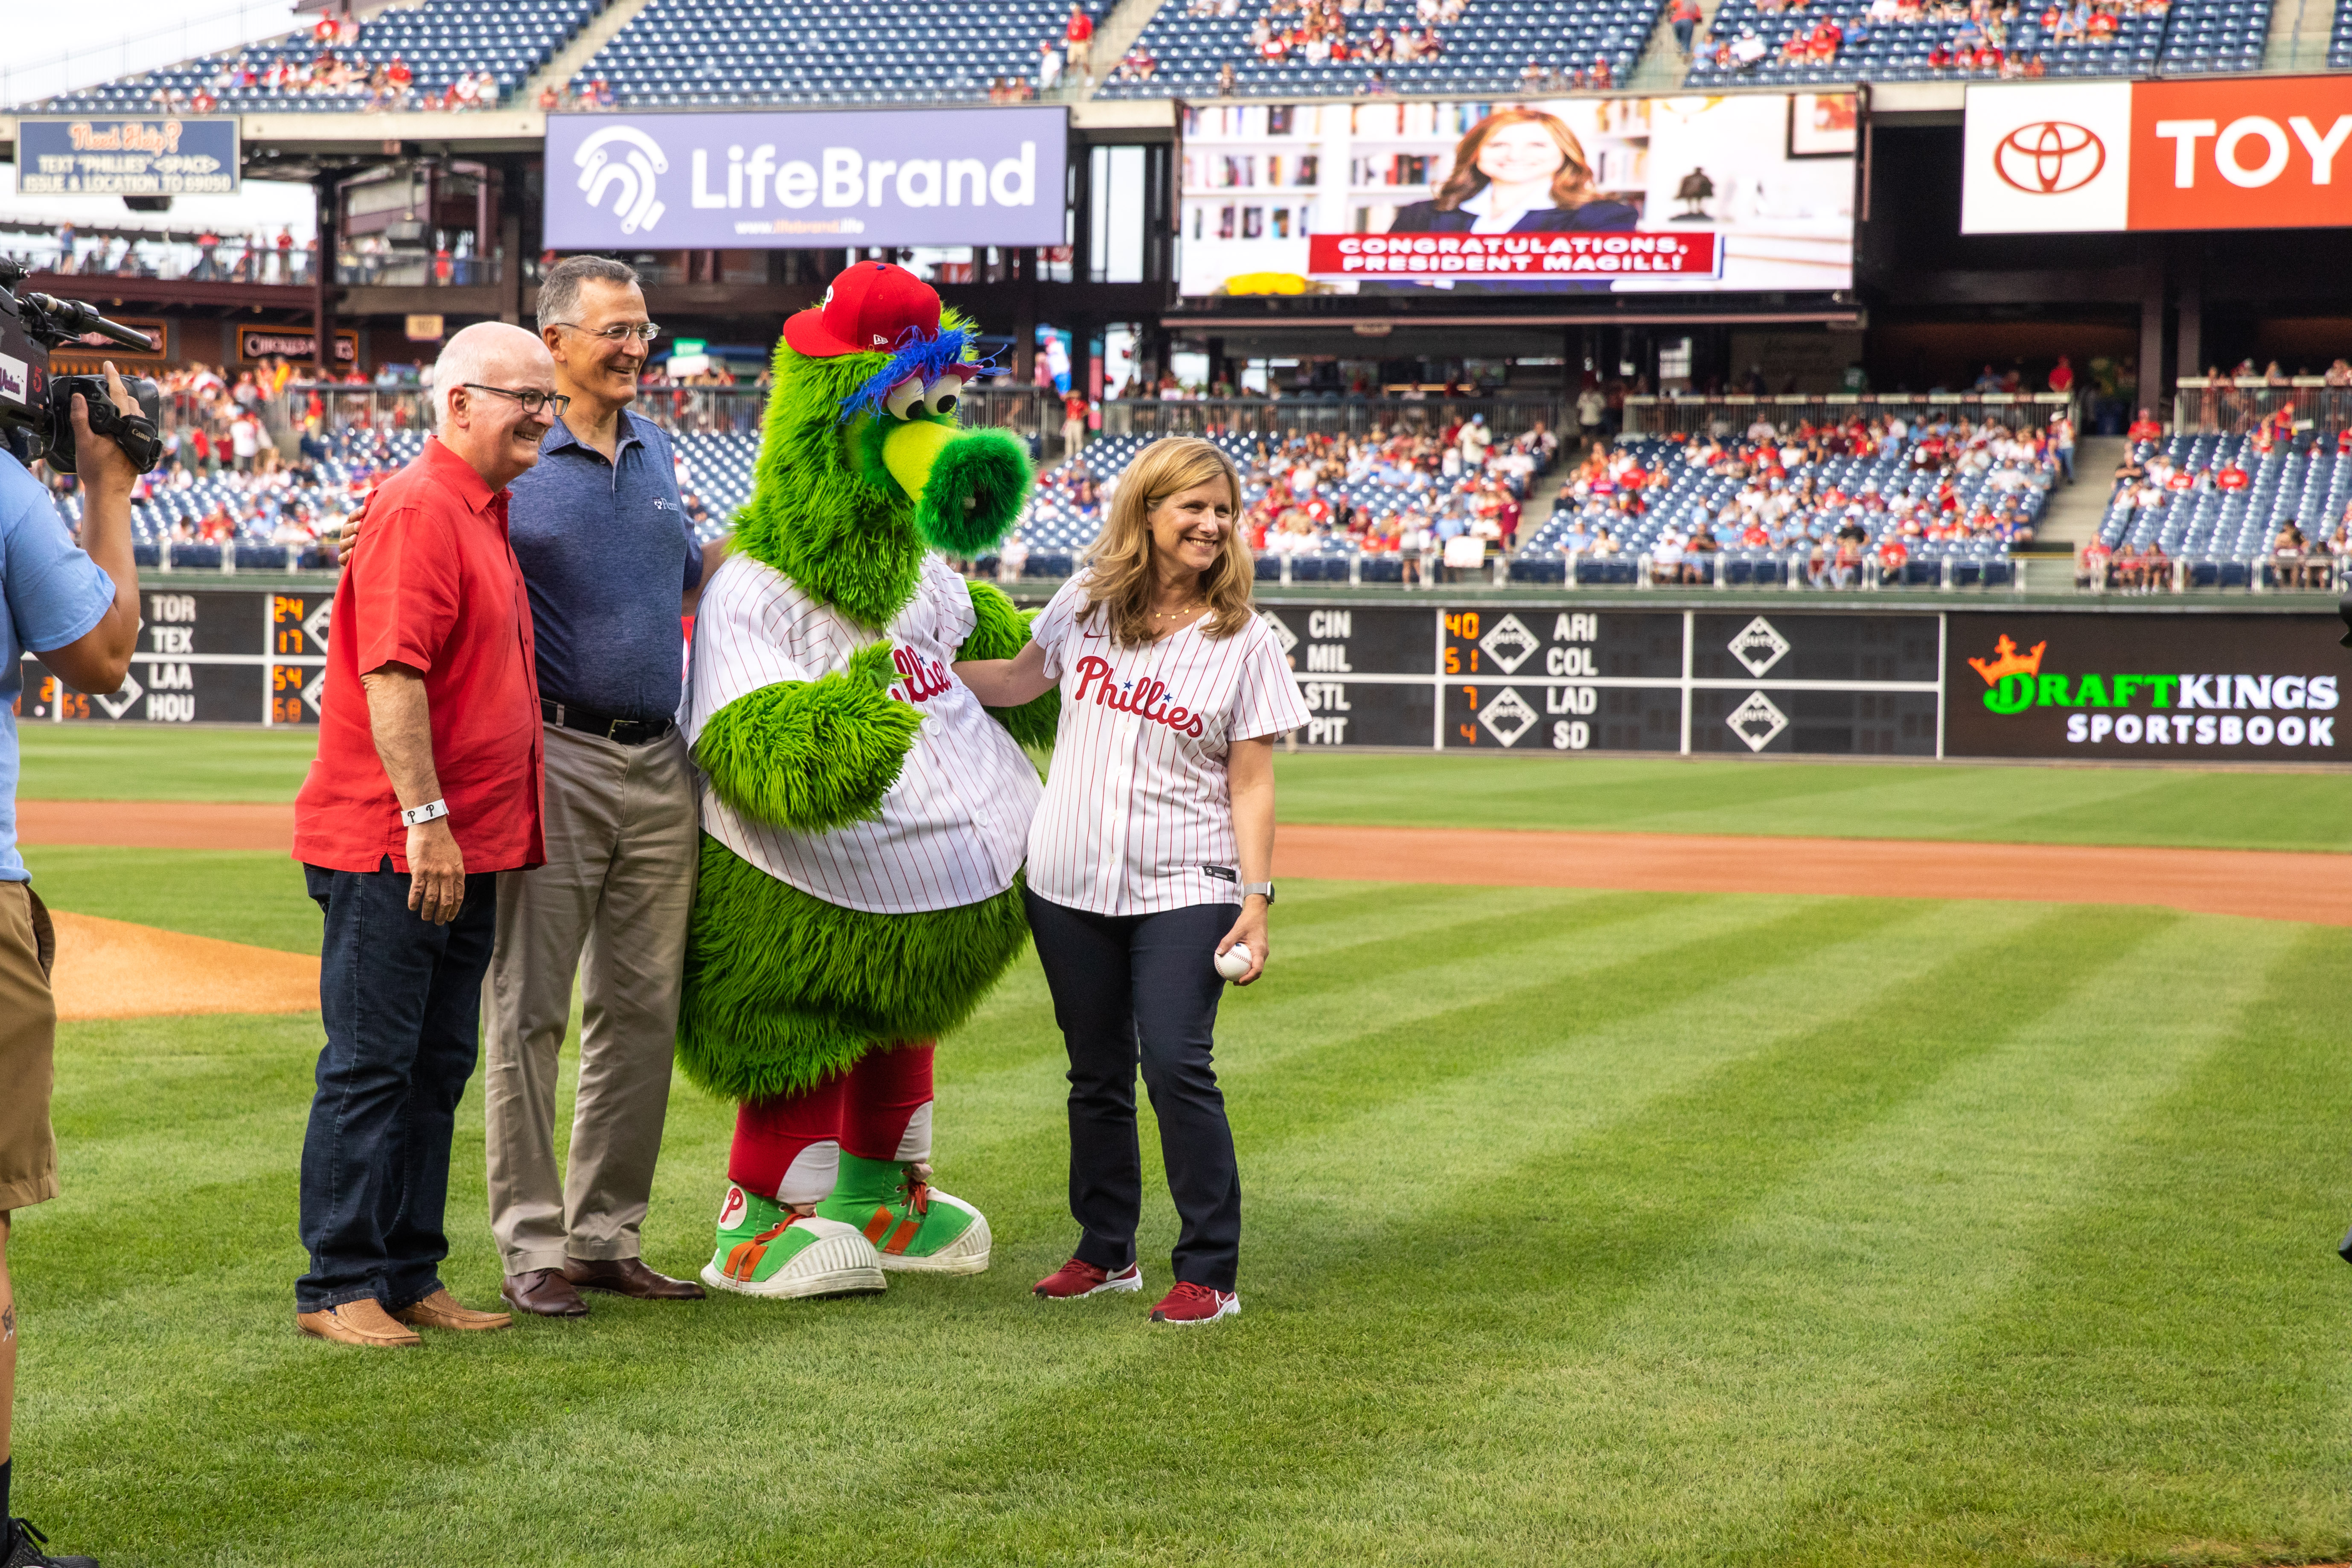 Liz Magill, the Philly Phanatic and two others at the pitchers mound on the field at the start of a Phillies game.